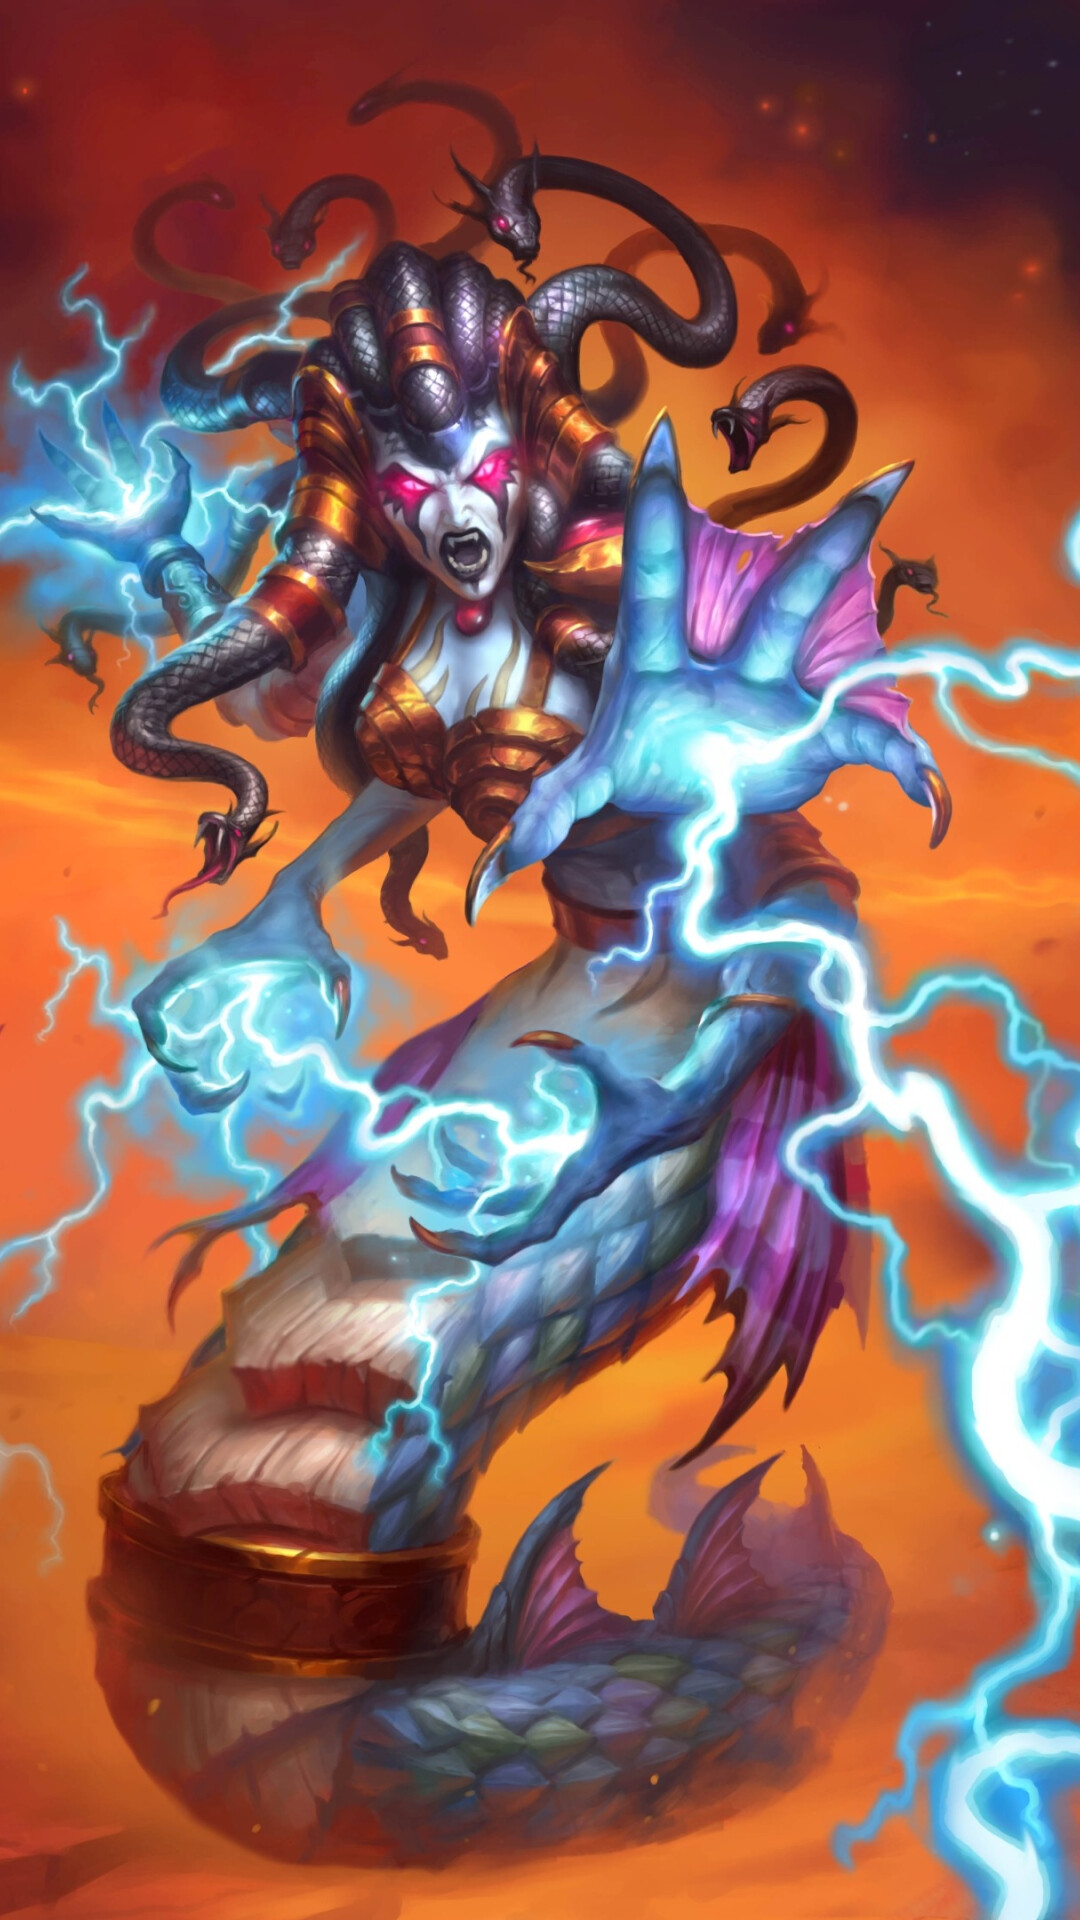 Hearthstone: Lady Vashj, A legendary shaman minion card, from the Ashes of Outland set. 1080x1920 Full HD Wallpaper.